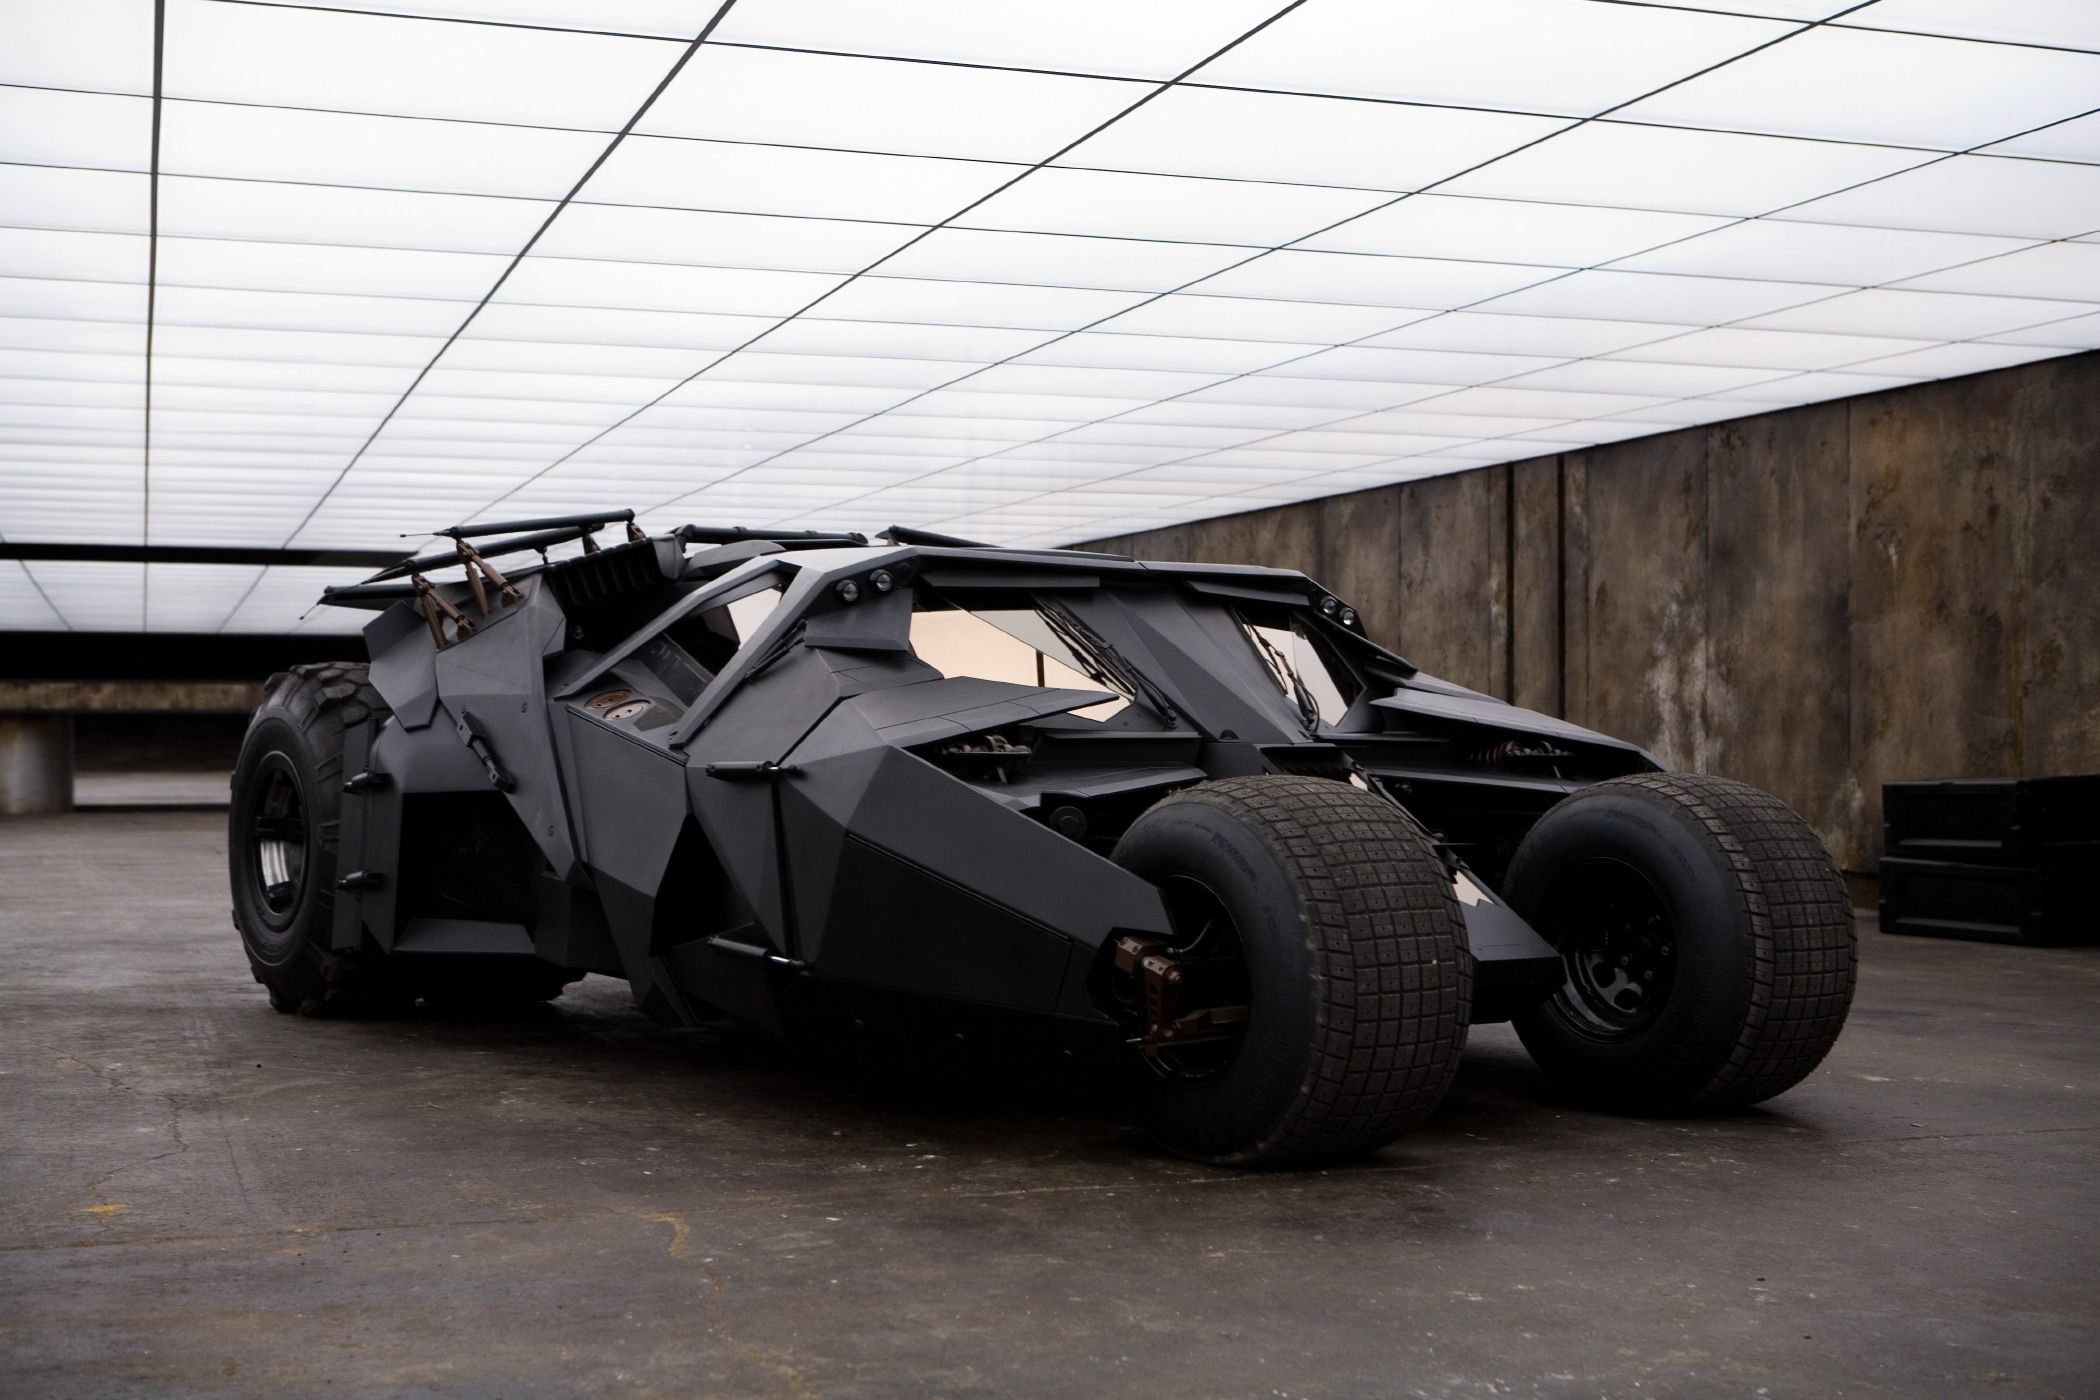 The Tumbler sitting in a garage